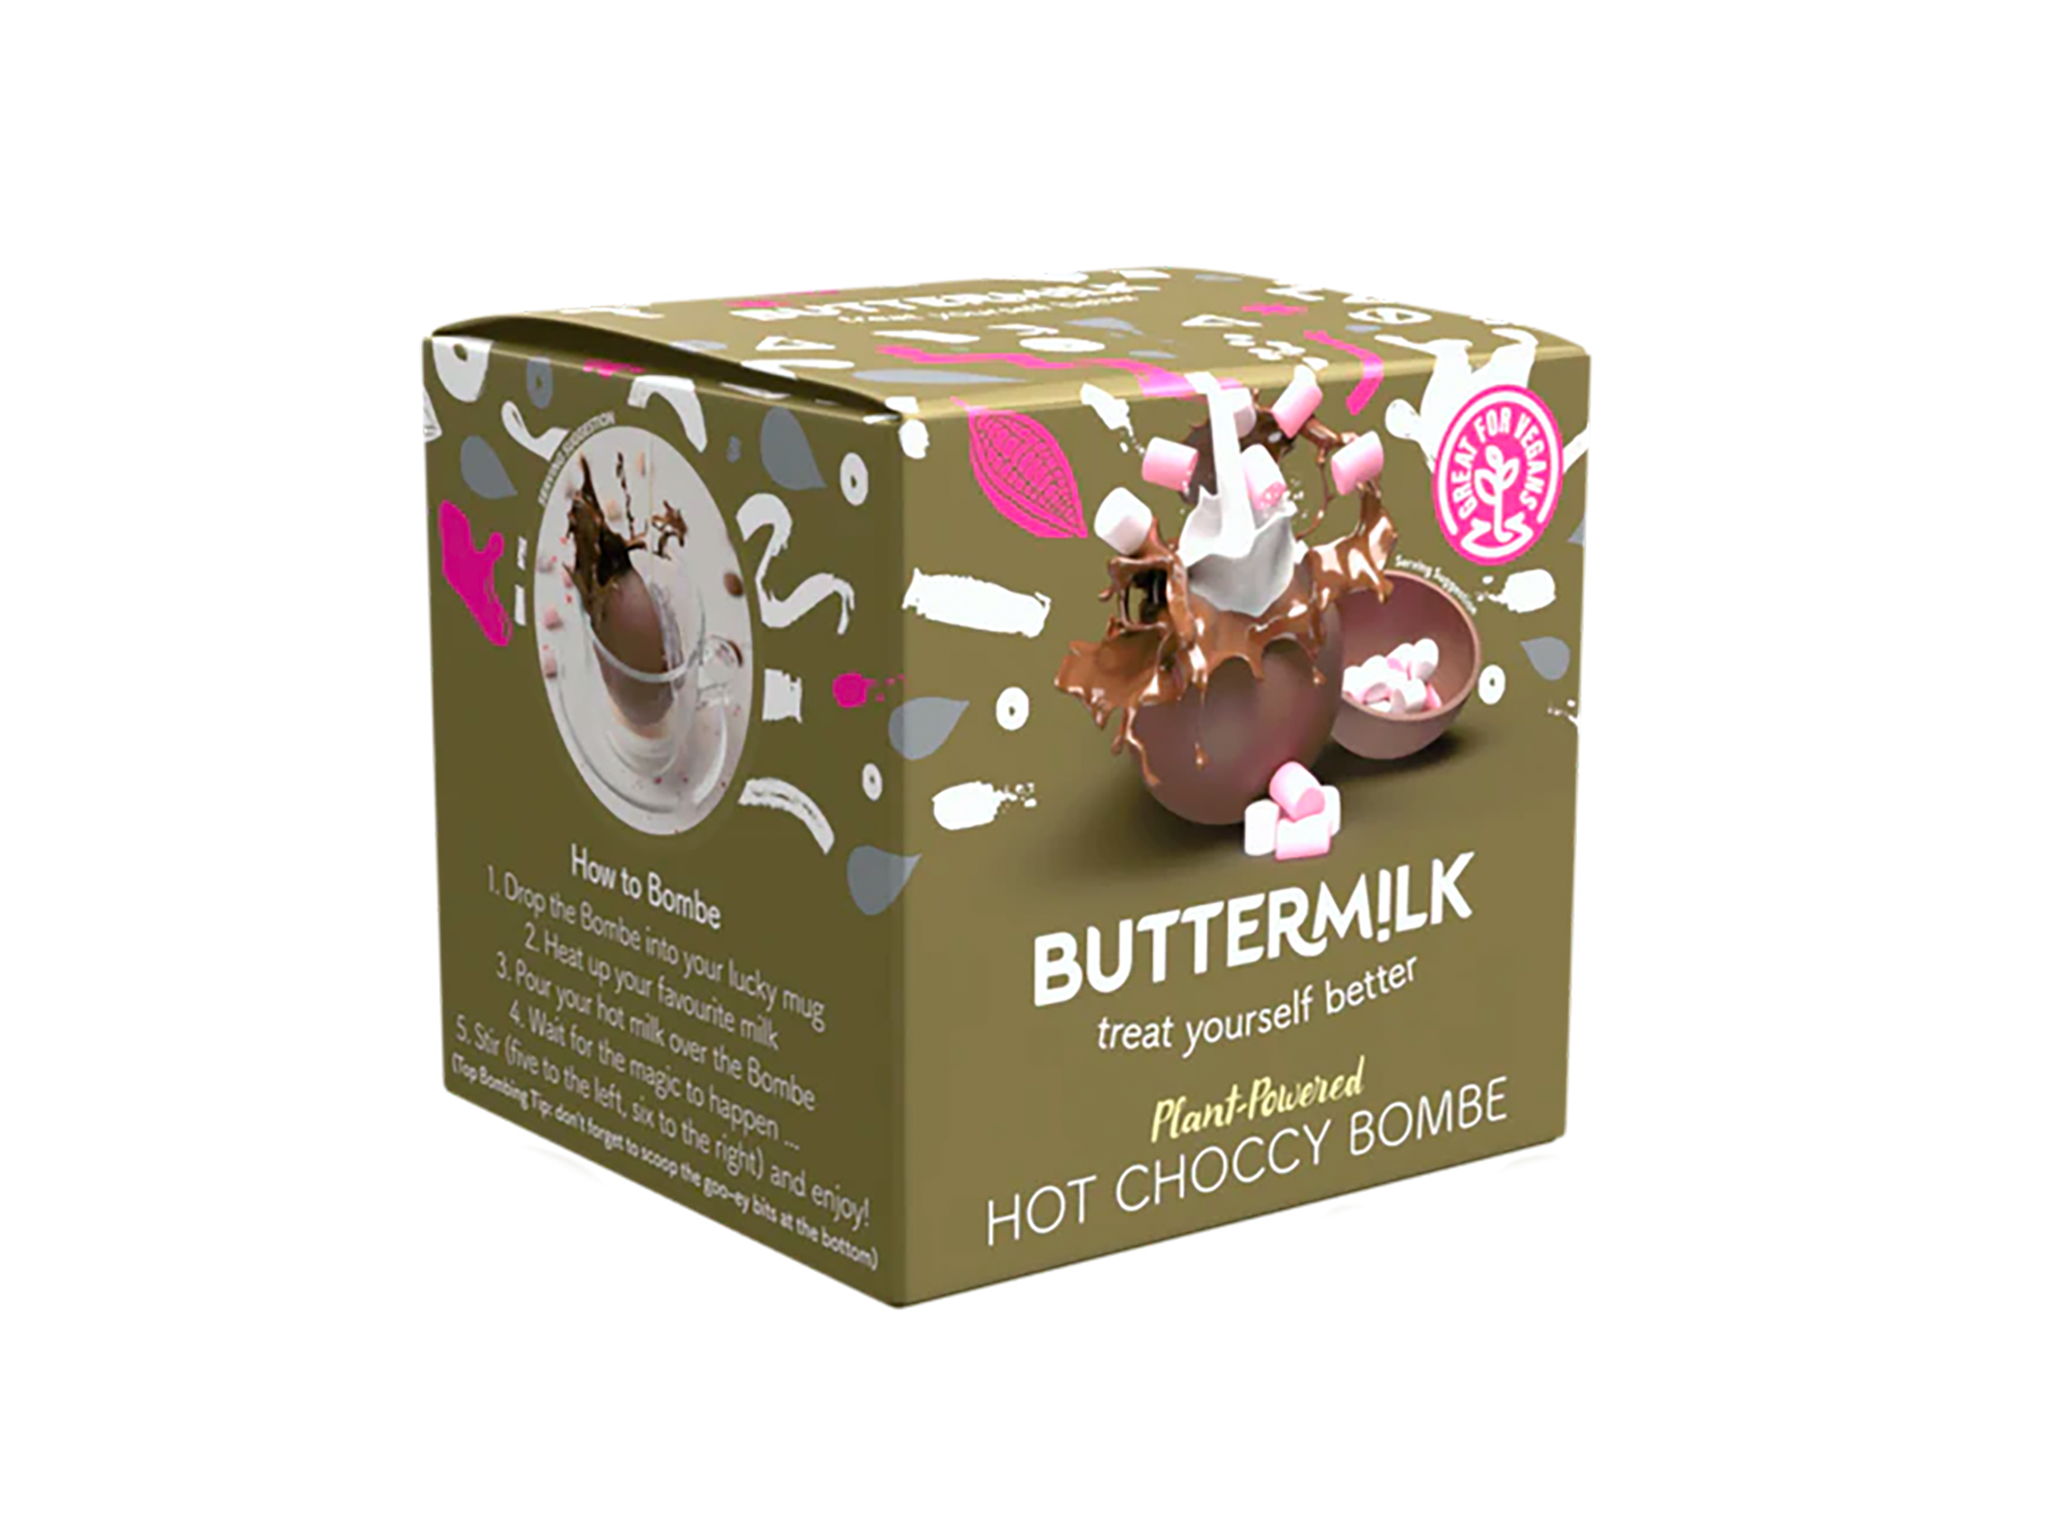 Butterm!lk hot choccy bombe.png